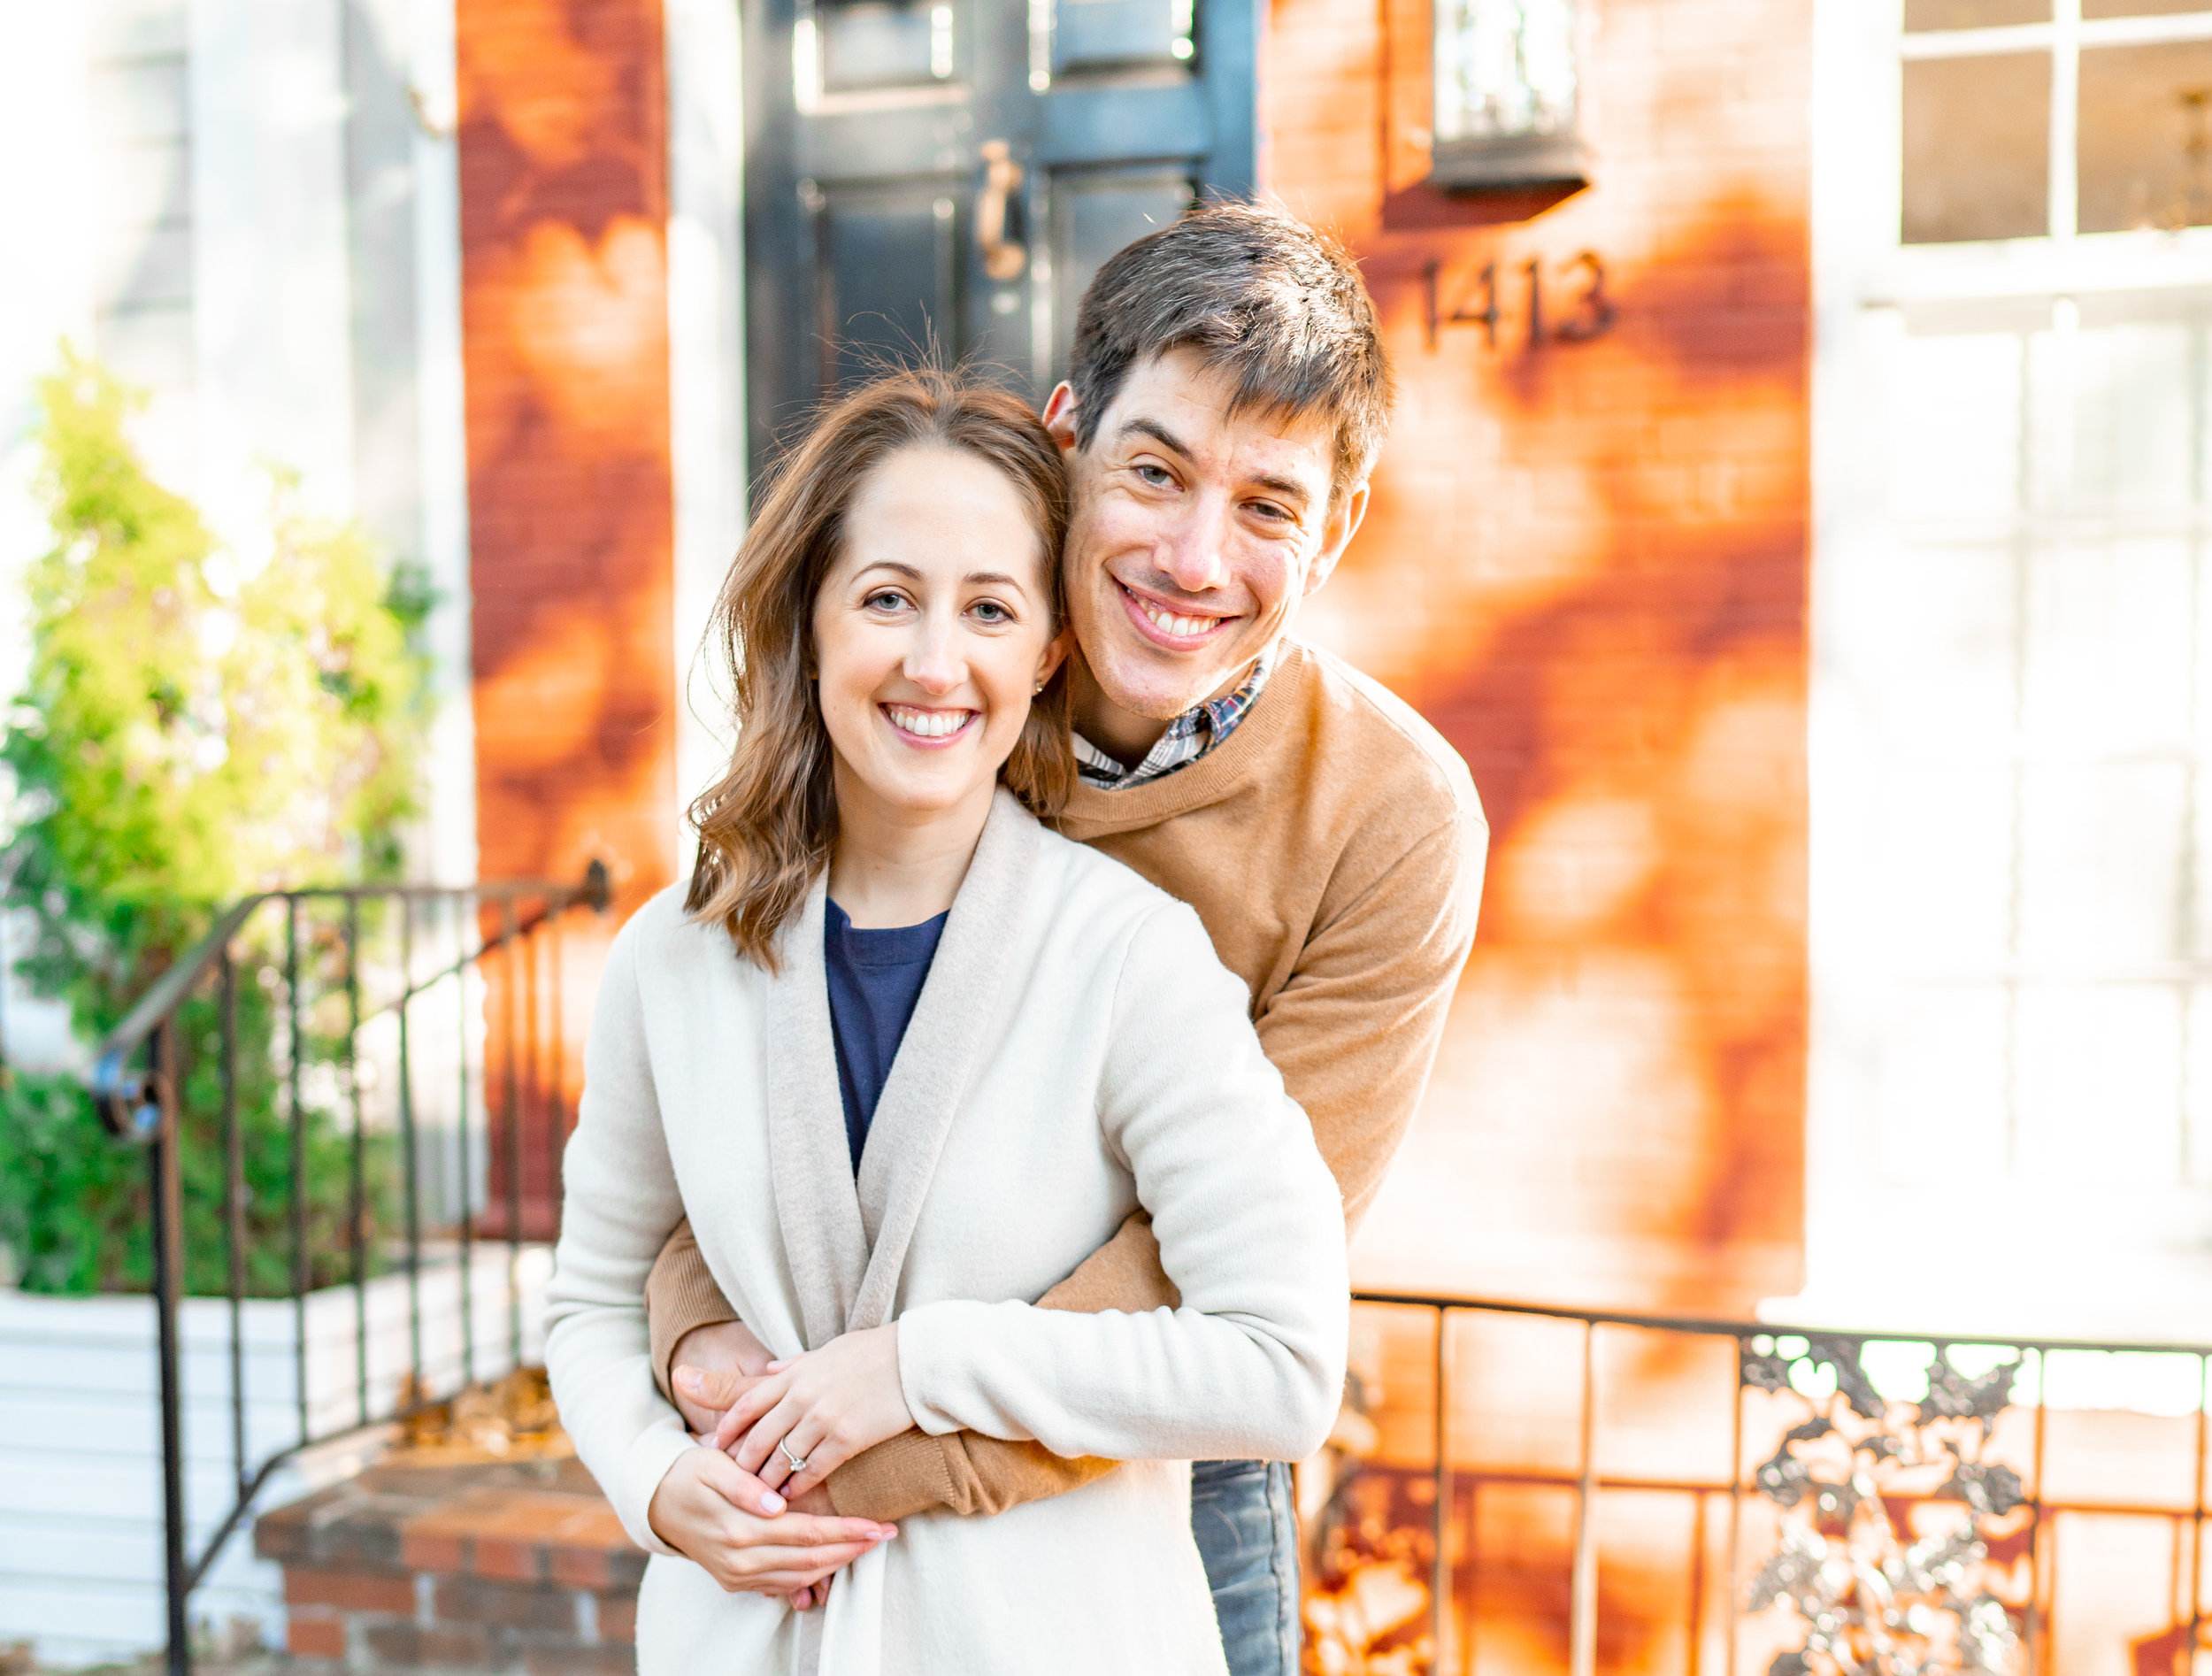 Bride and groom during engagement shoot in front of colorful Georgetown townhouses